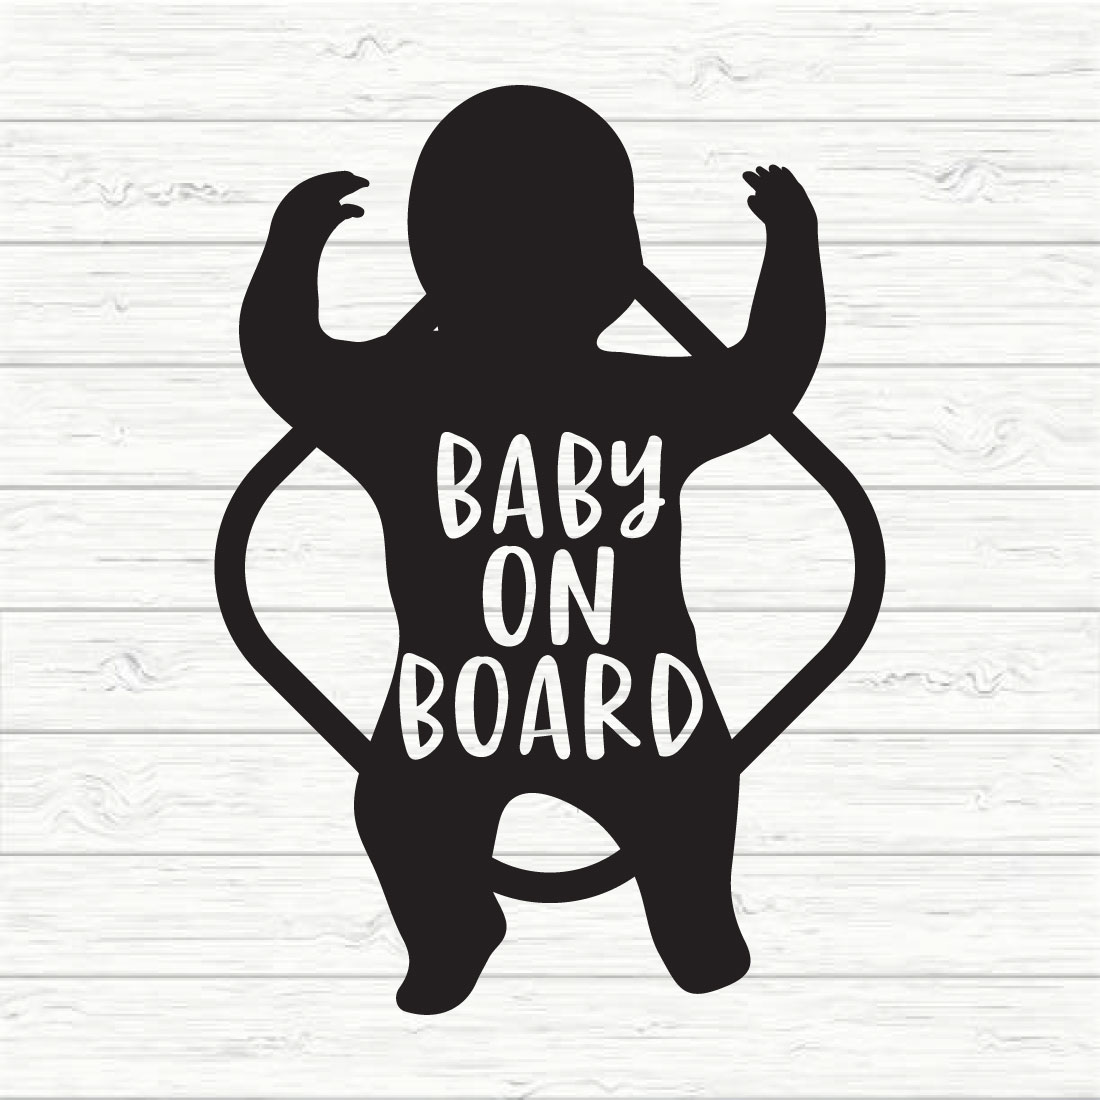 Baby on Board preview image.